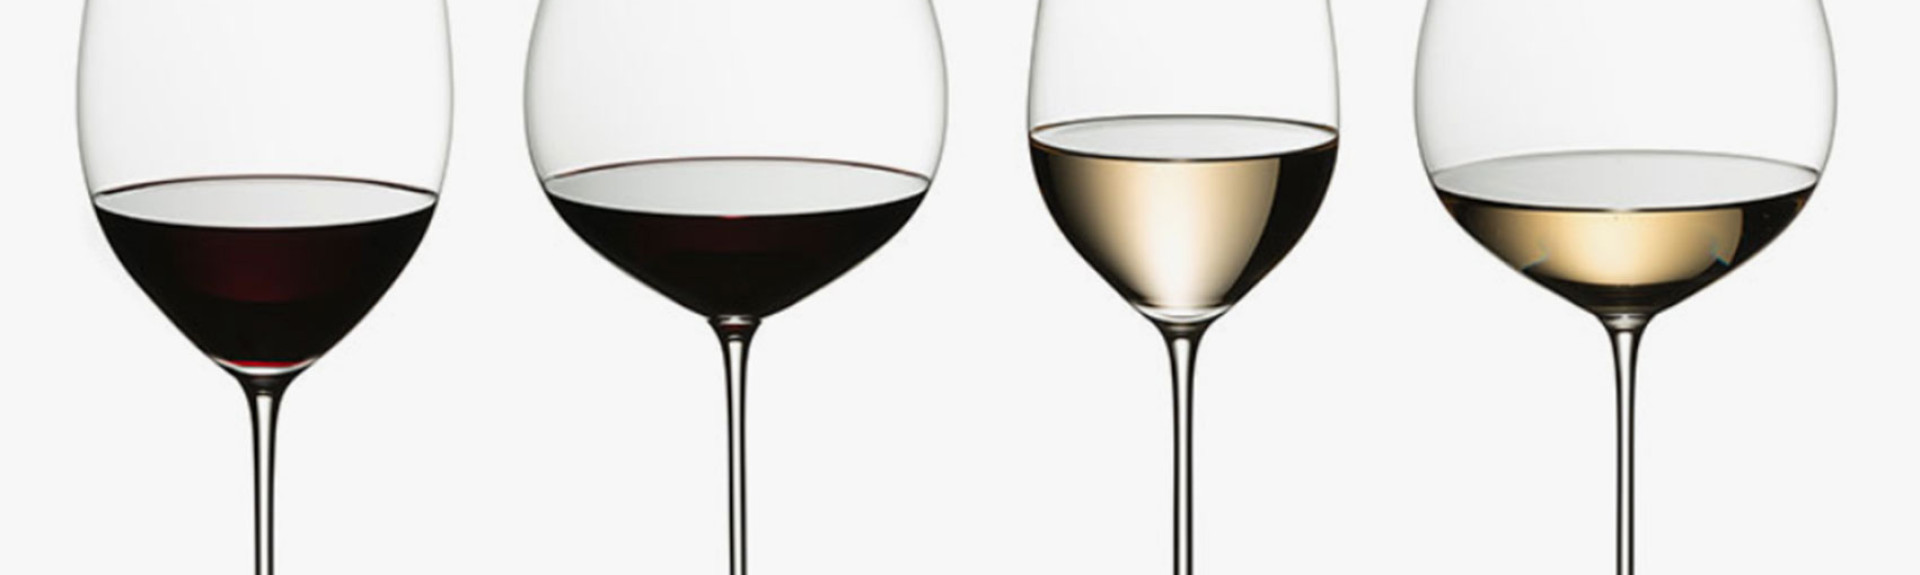 Size Matters: British Study Says Wineglasses Are Growing